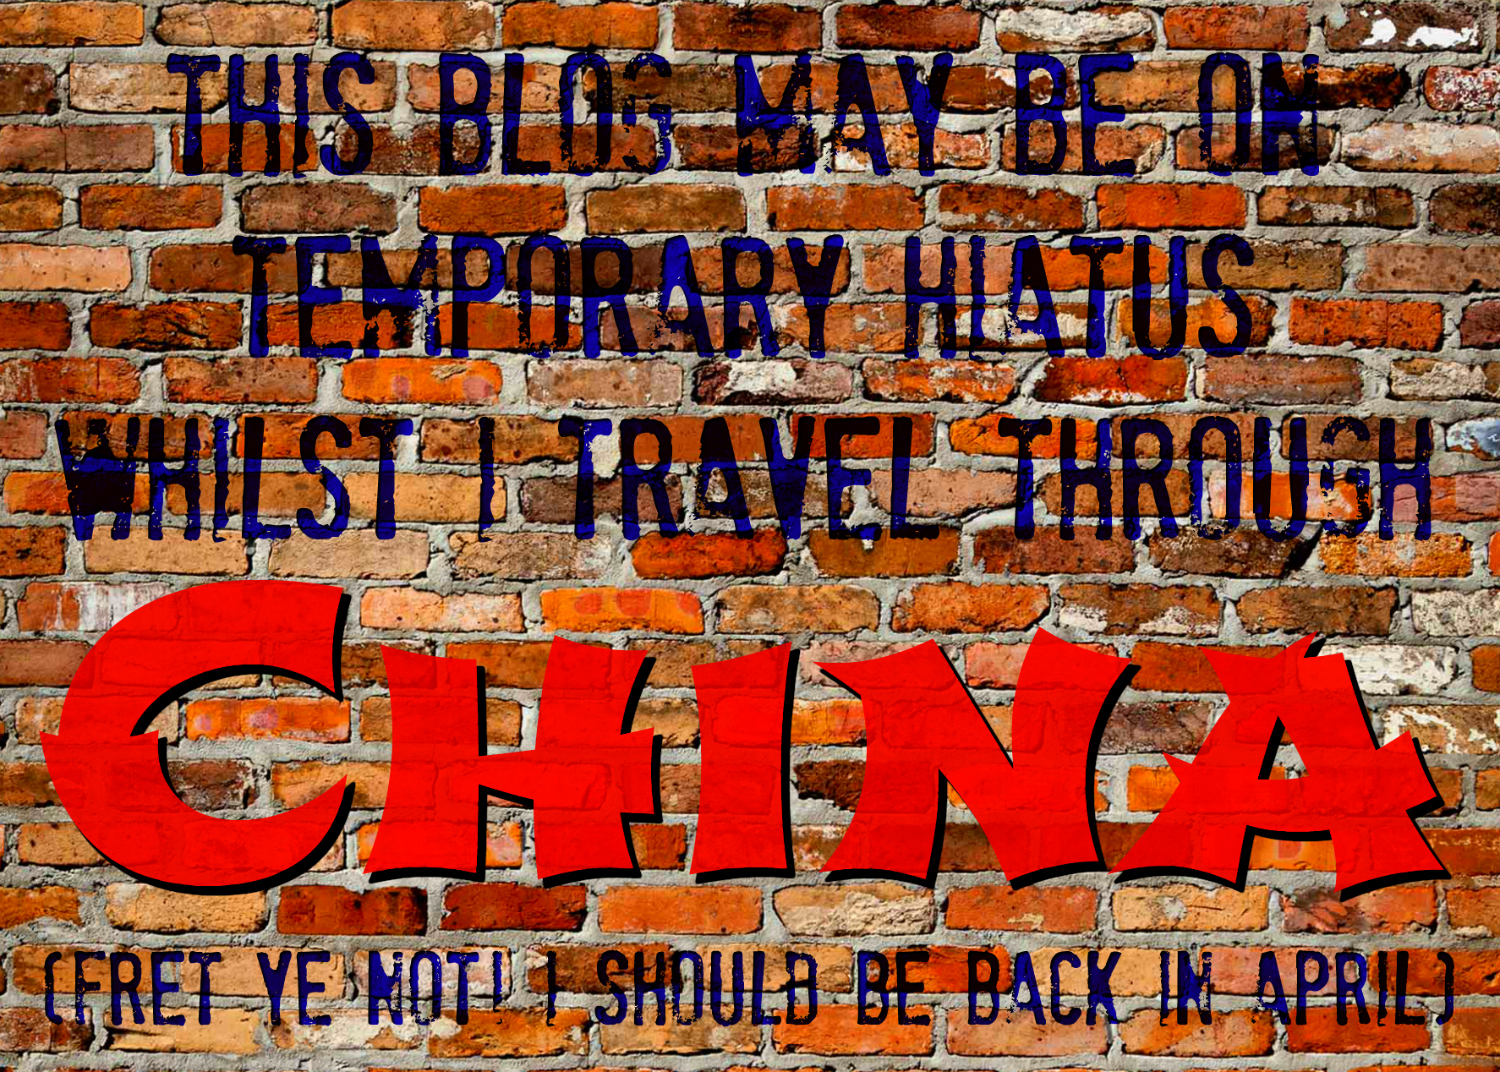 And now for a likely 3-week post hiatus as I head off to China